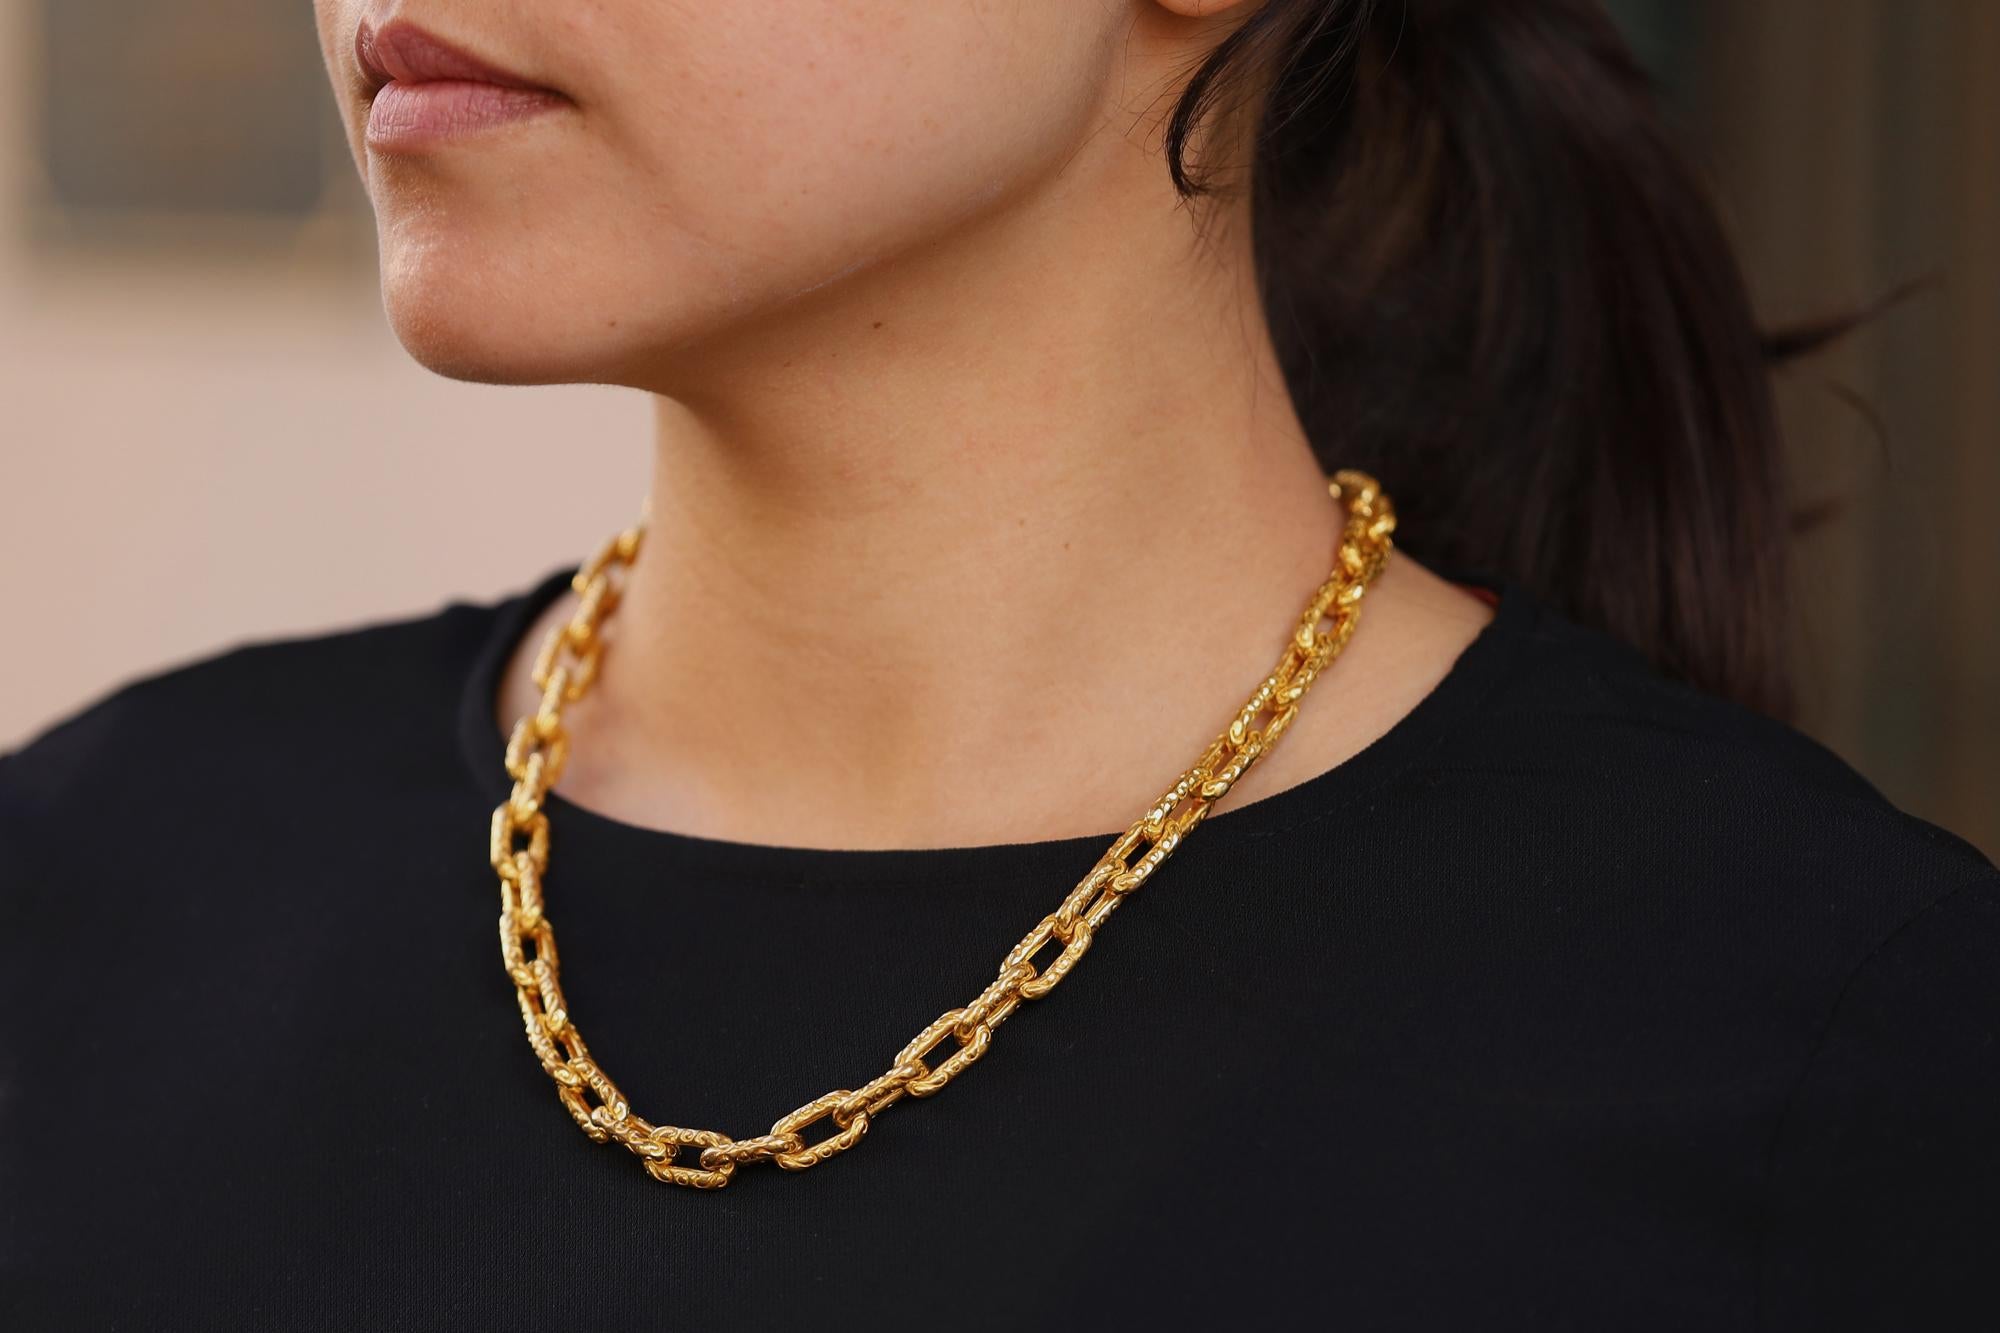 A vintage yellow gold lovers dream! At nearly 5 ounces of pure gold, this stunning statement showcases a timeless design matched with an incredibly detailed artisanal craftsmanship. The classic chain links are delectably engraved with flourishes and